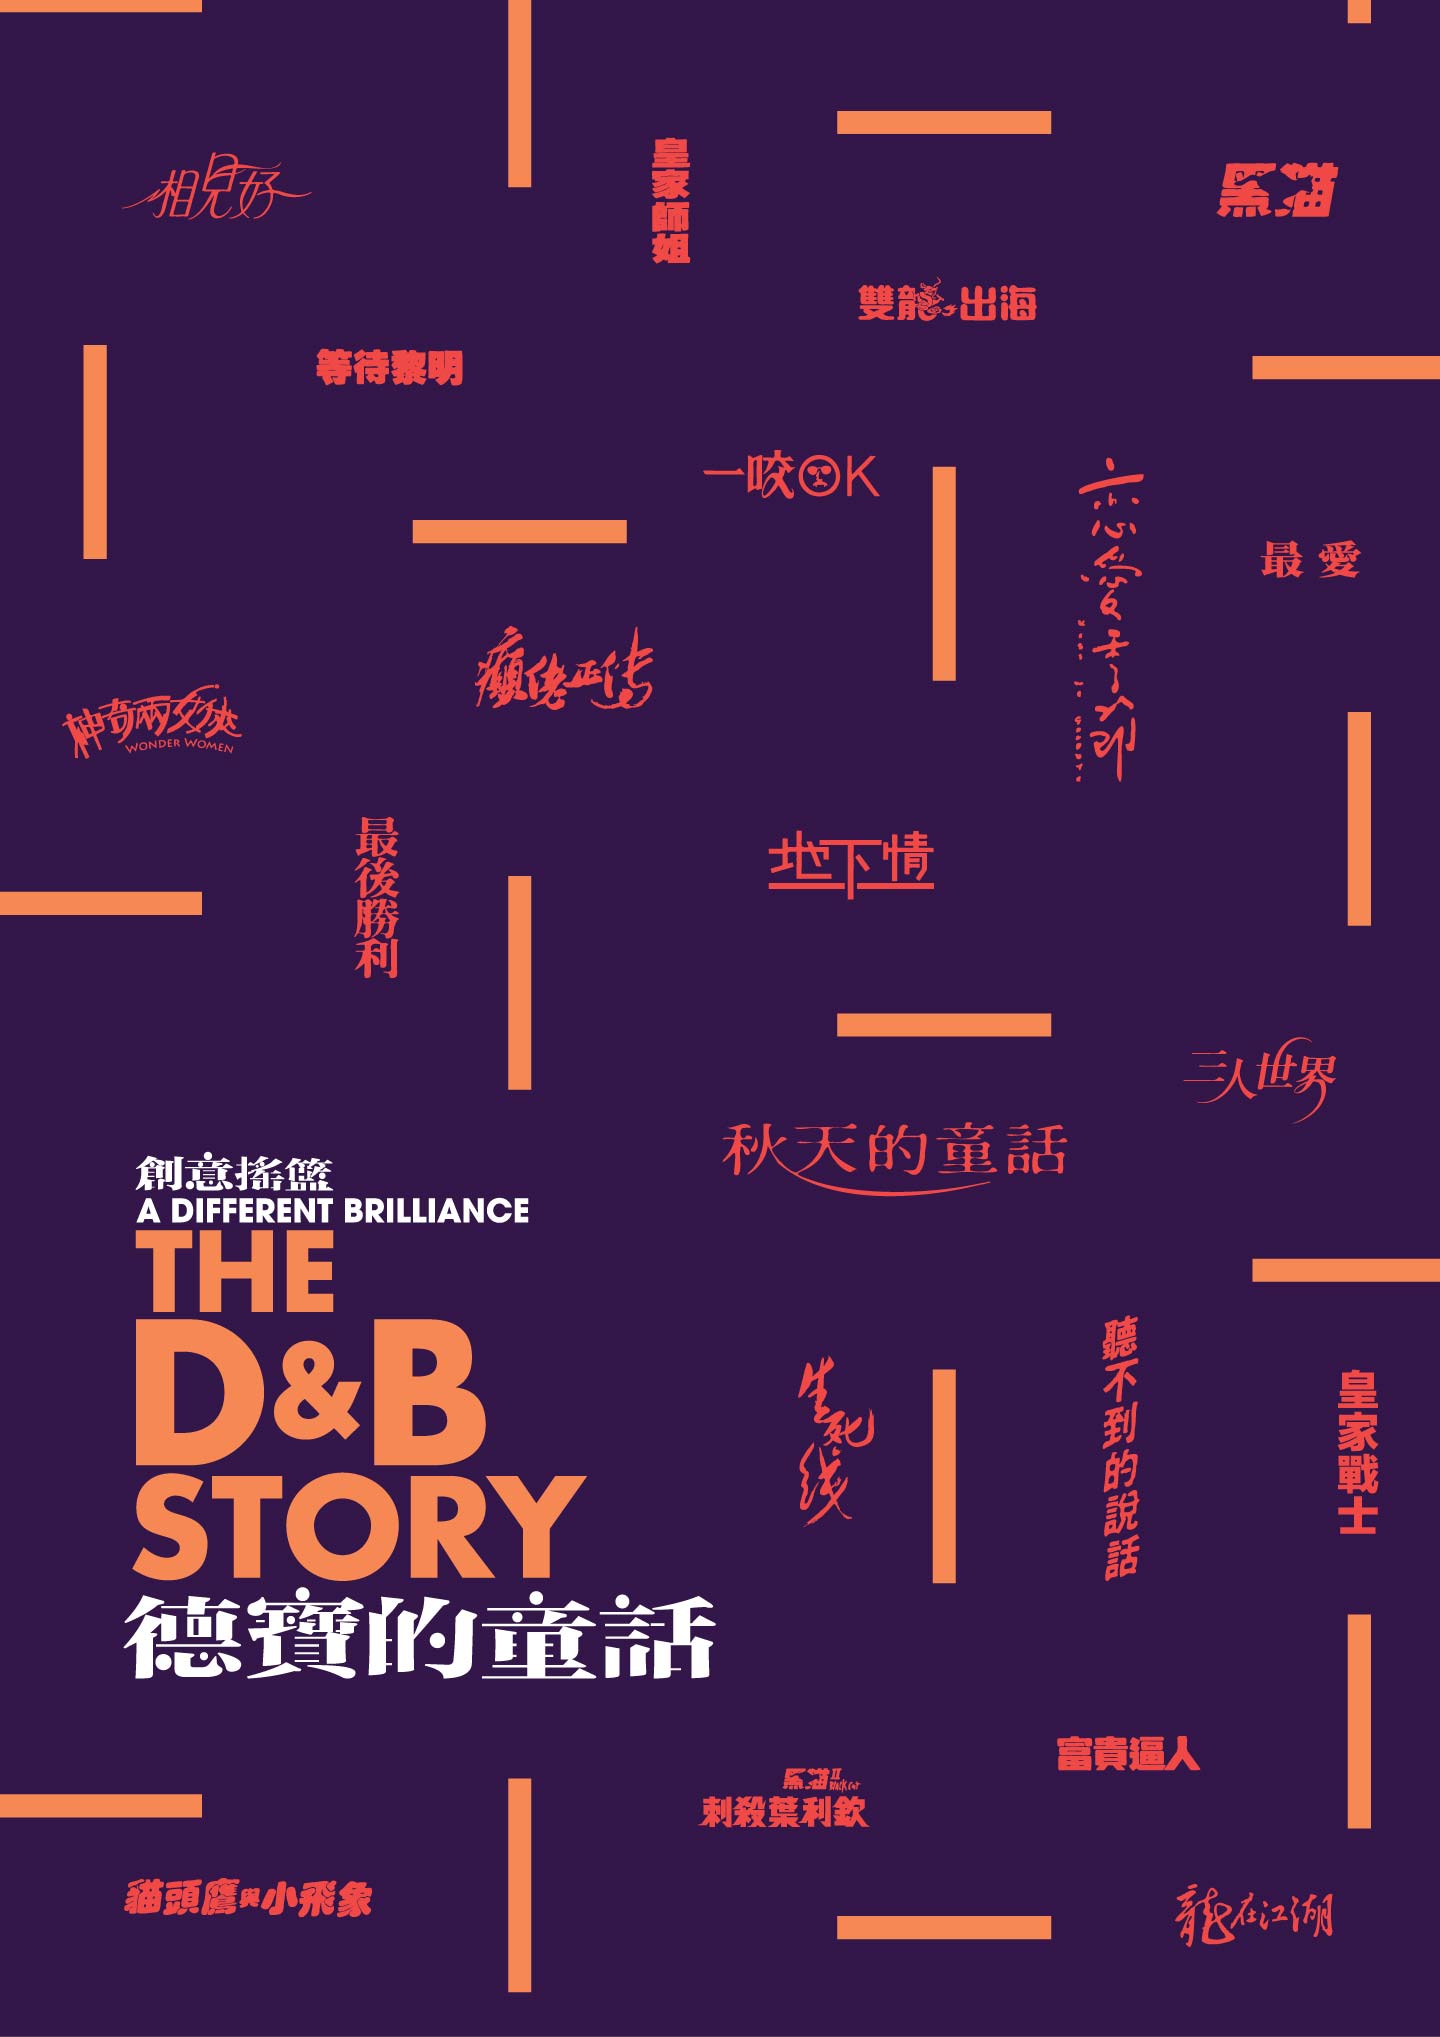 A Different Brilliance—The D & B Story